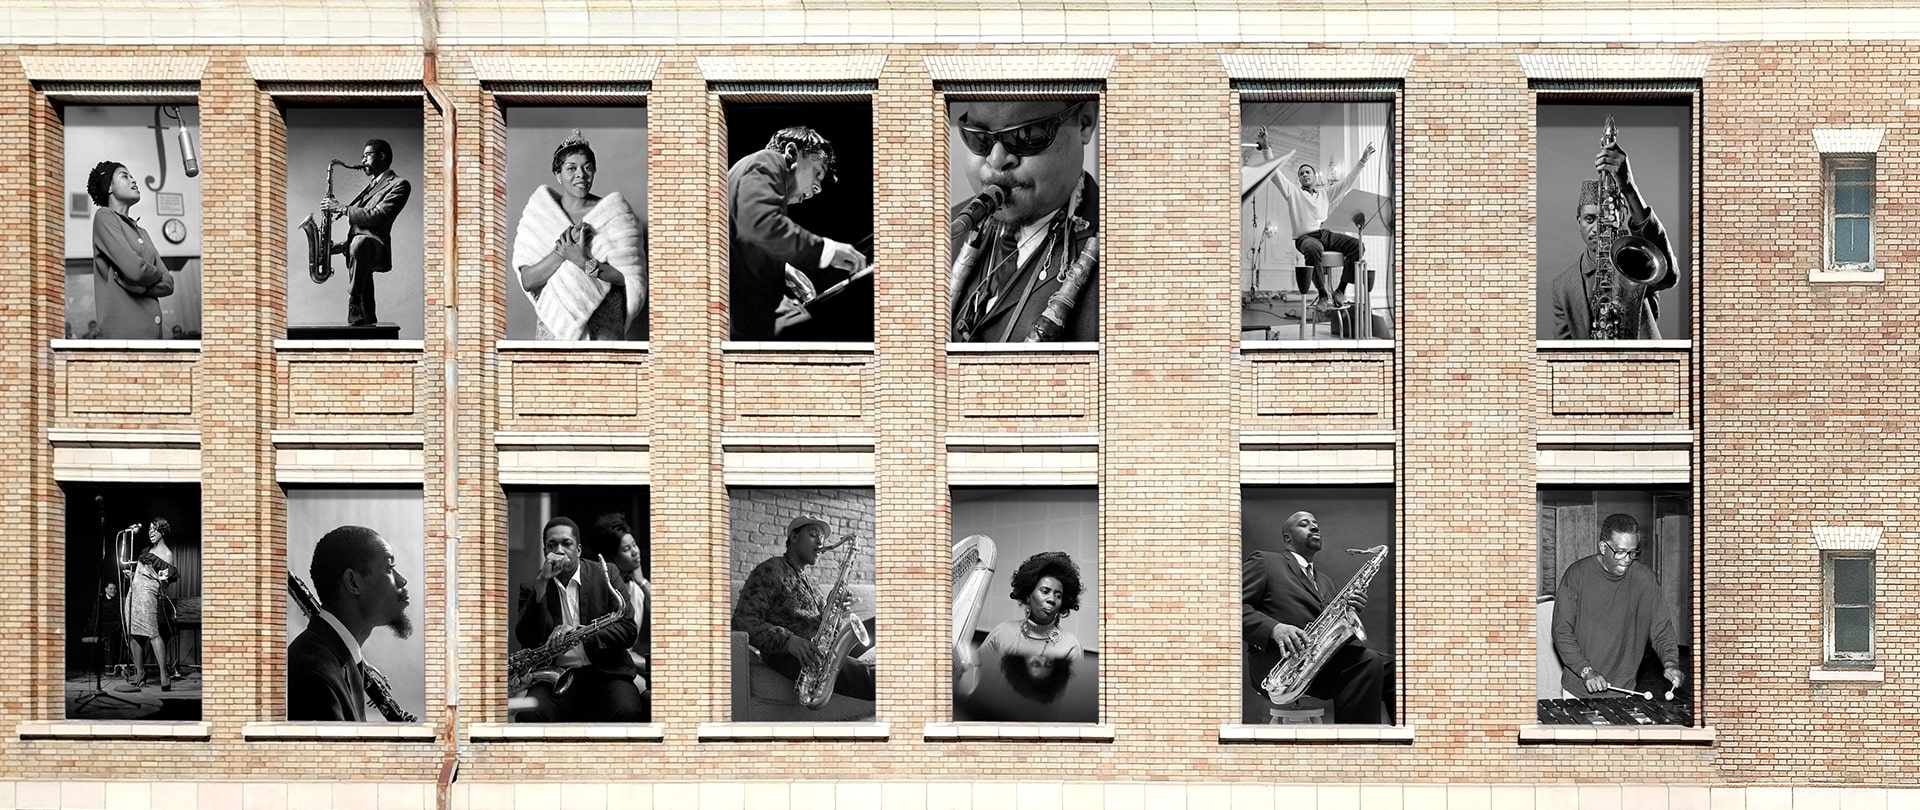 Some of the Chuck Stewart photos on display across Franklin St from SFJAZZ Center 